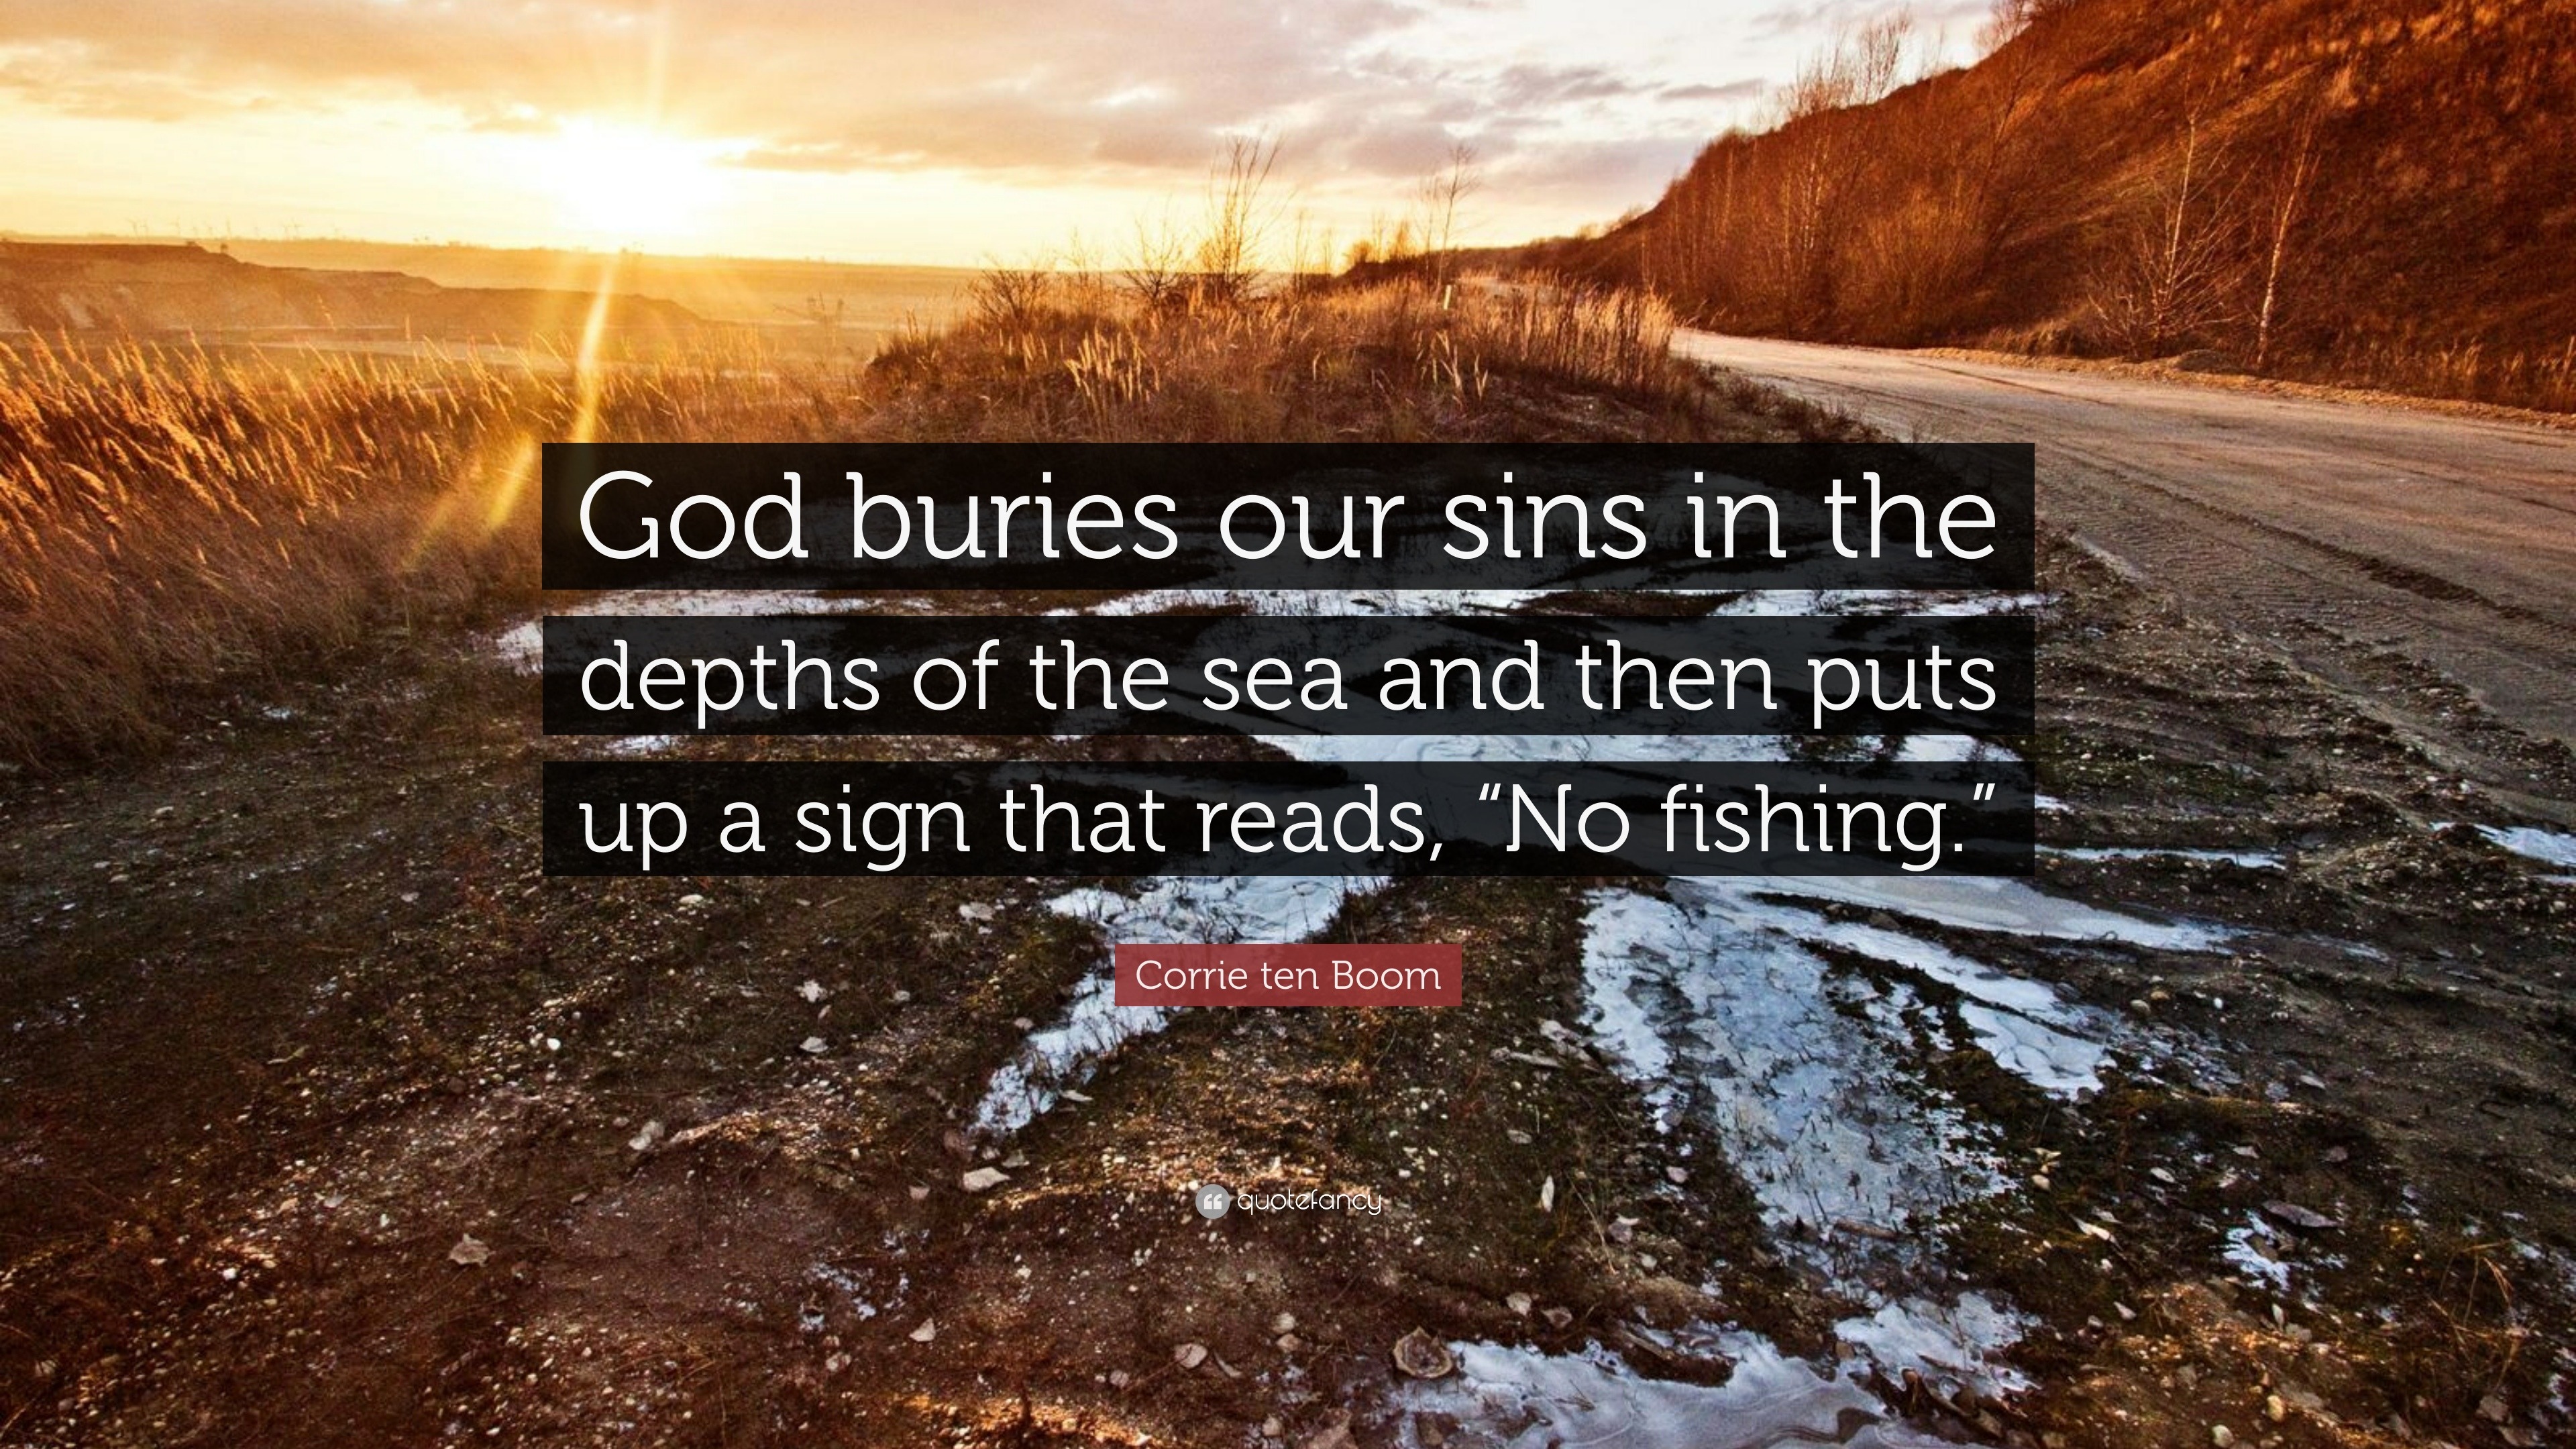 Corrie Ten Boom - God takes our sins – the past, present and